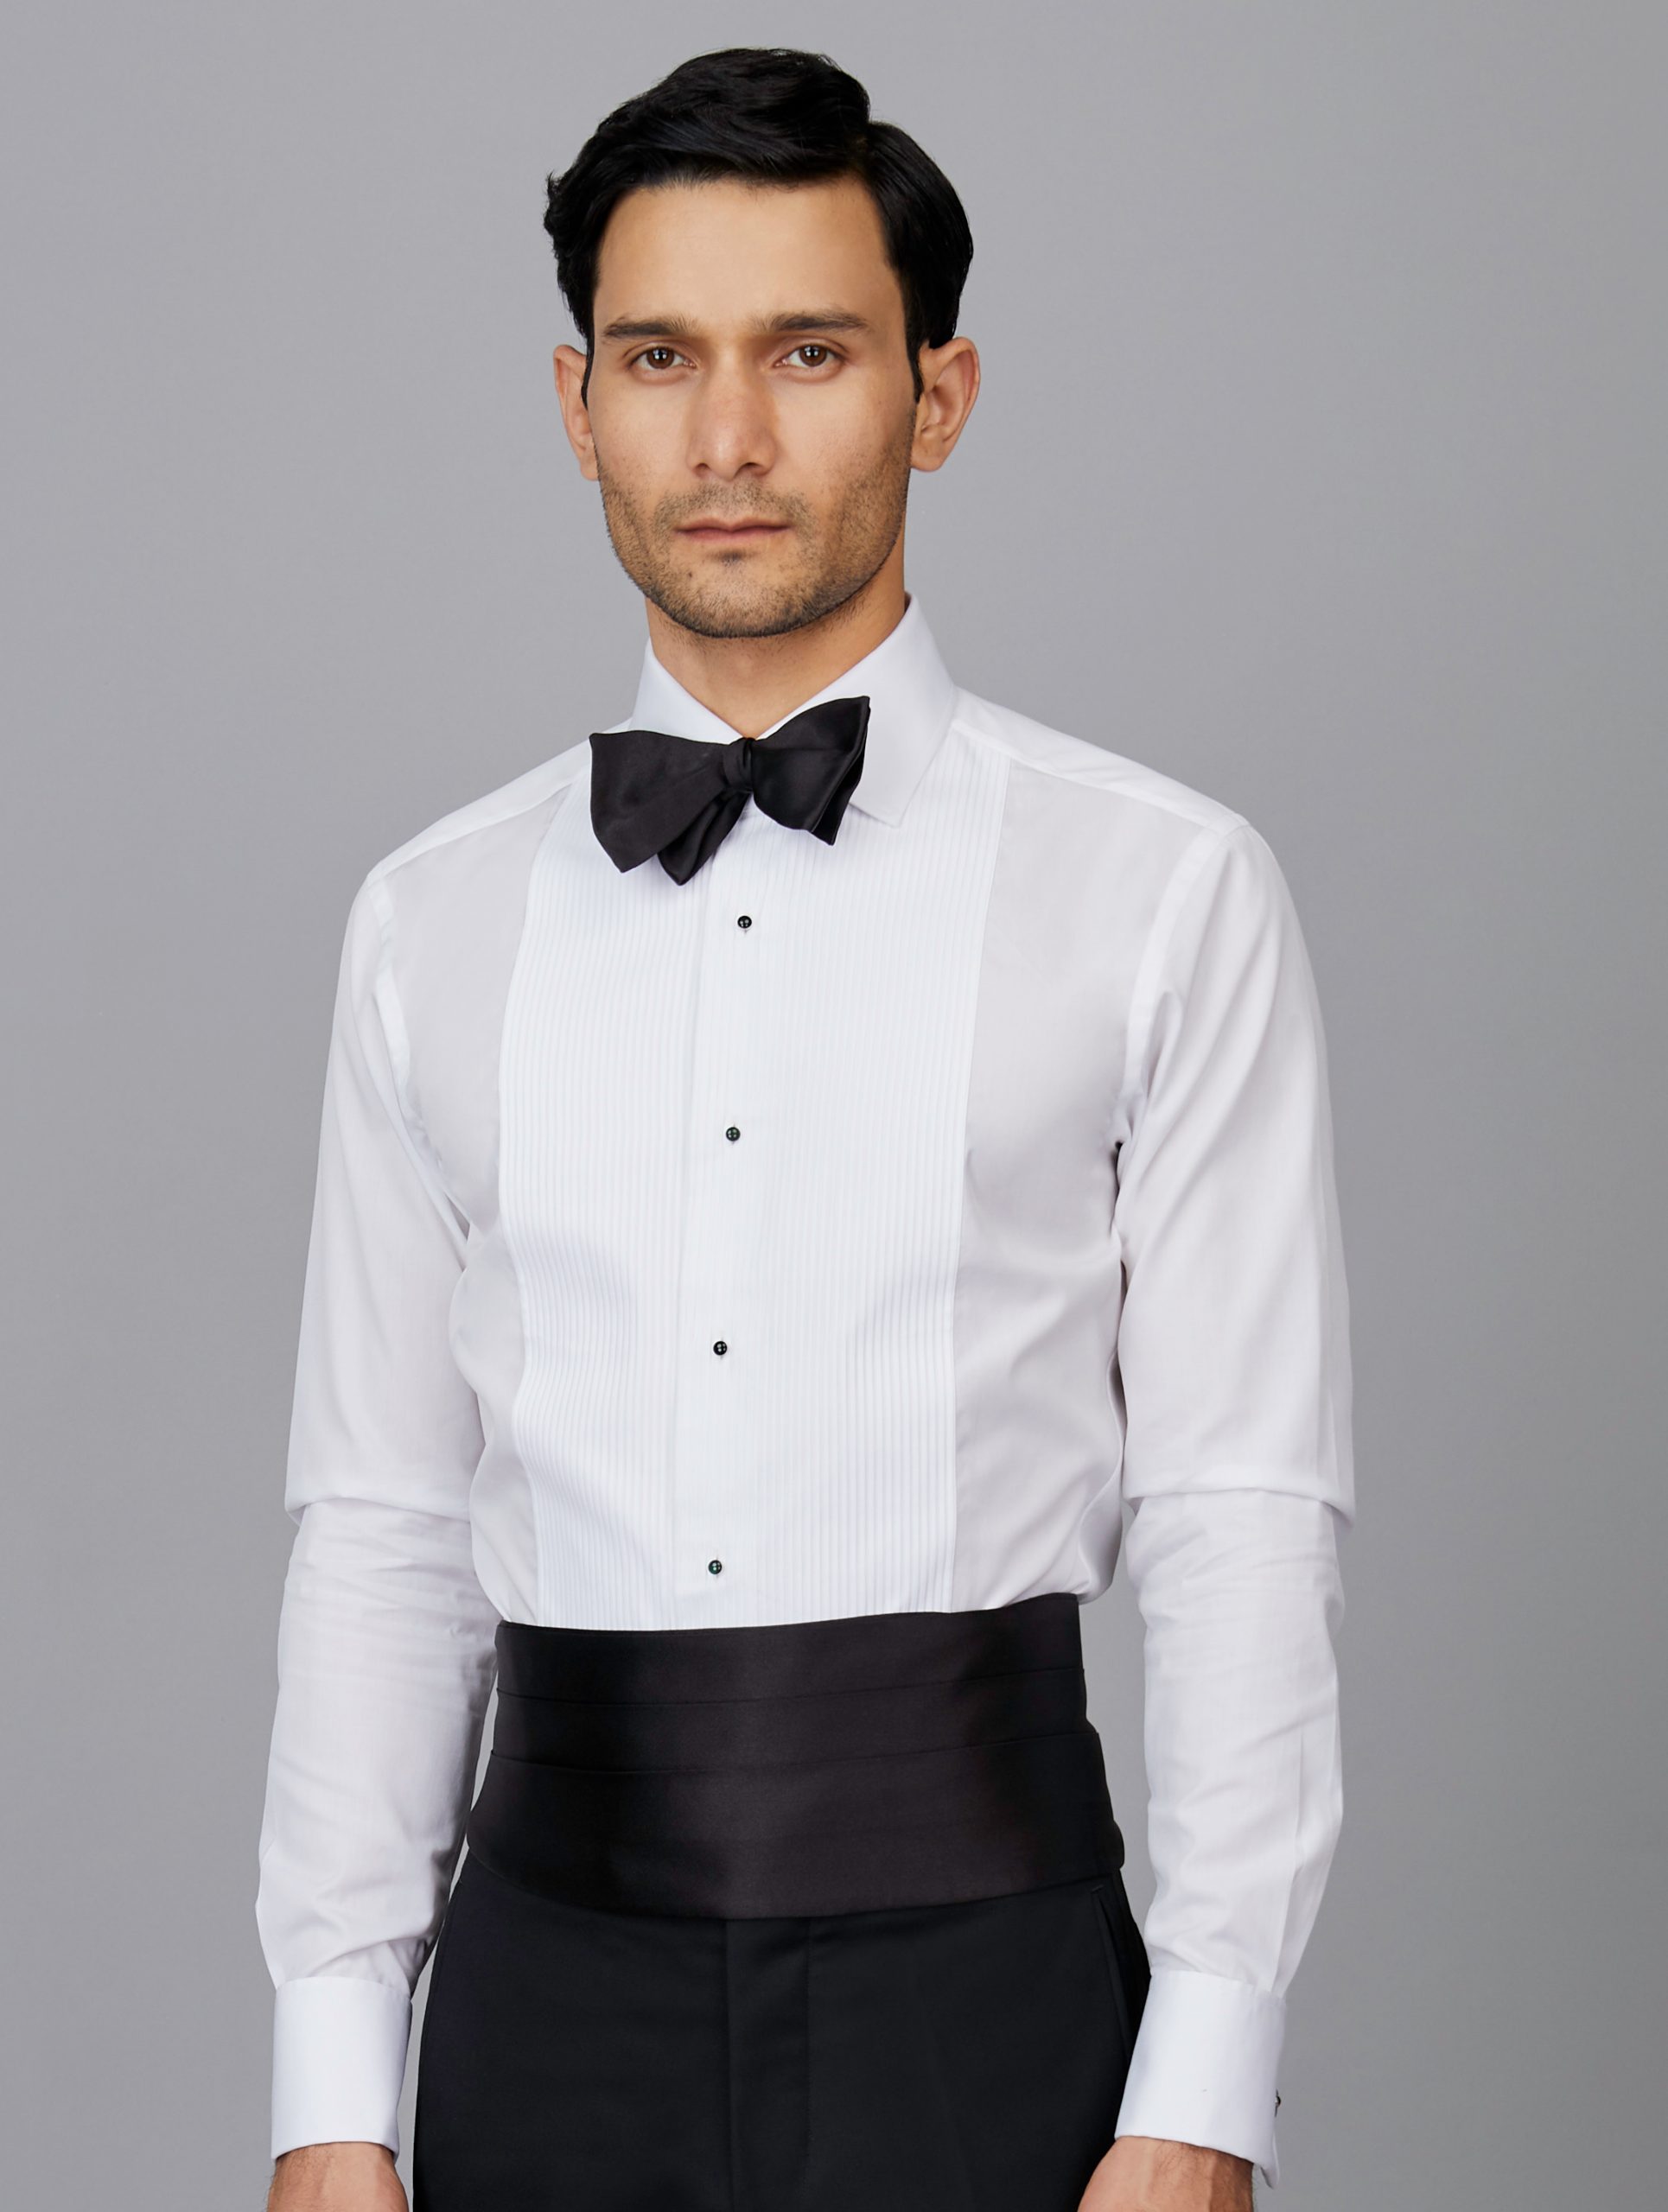 Classic Elegance: Tuxedo Shirts for the Modern Man| Camessi Collections